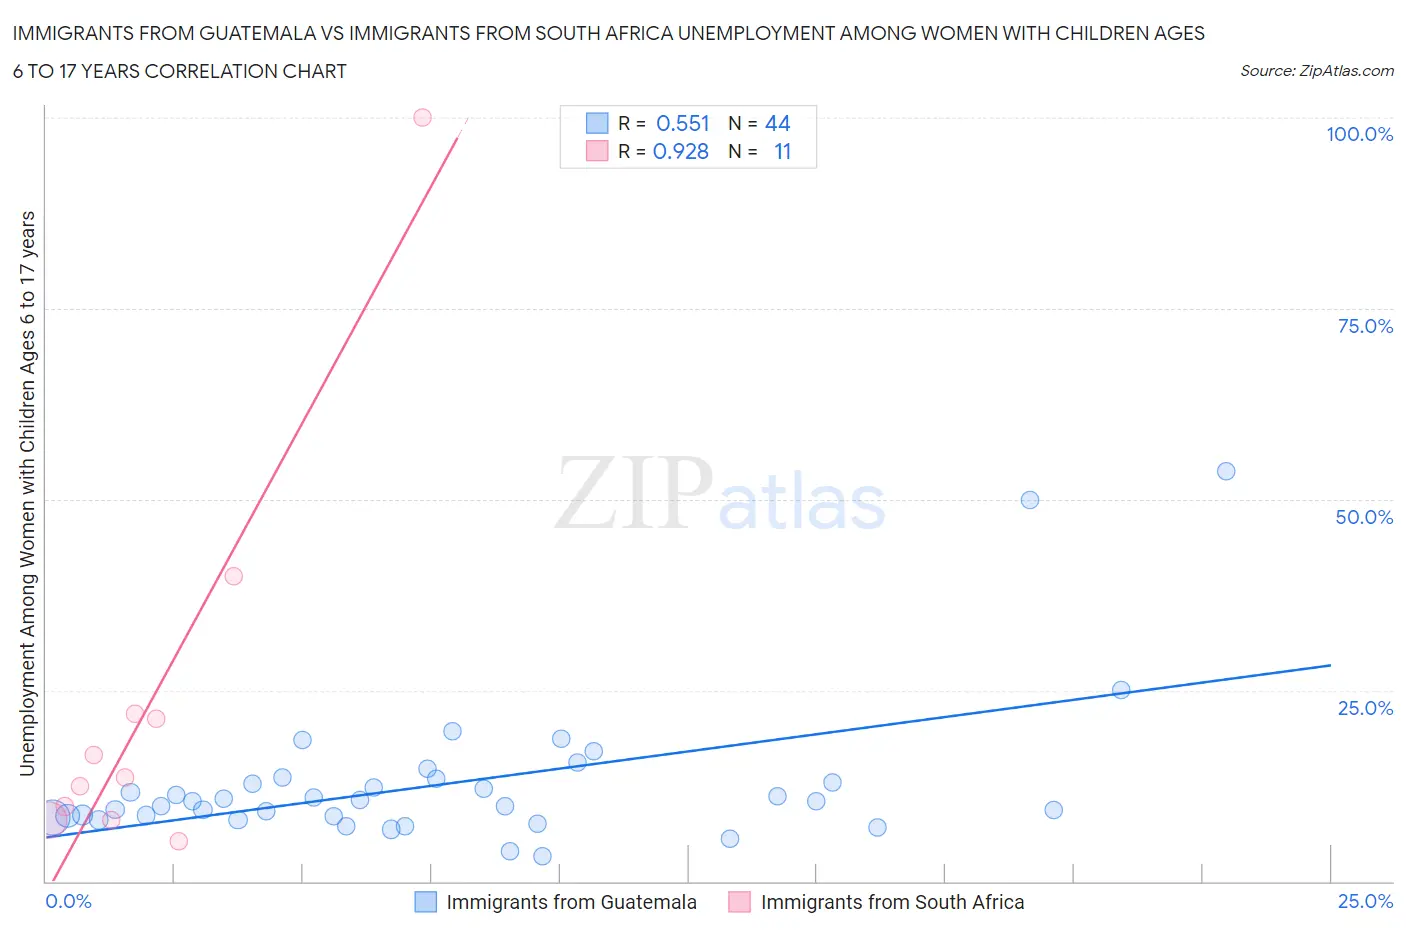 Immigrants from Guatemala vs Immigrants from South Africa Unemployment Among Women with Children Ages 6 to 17 years